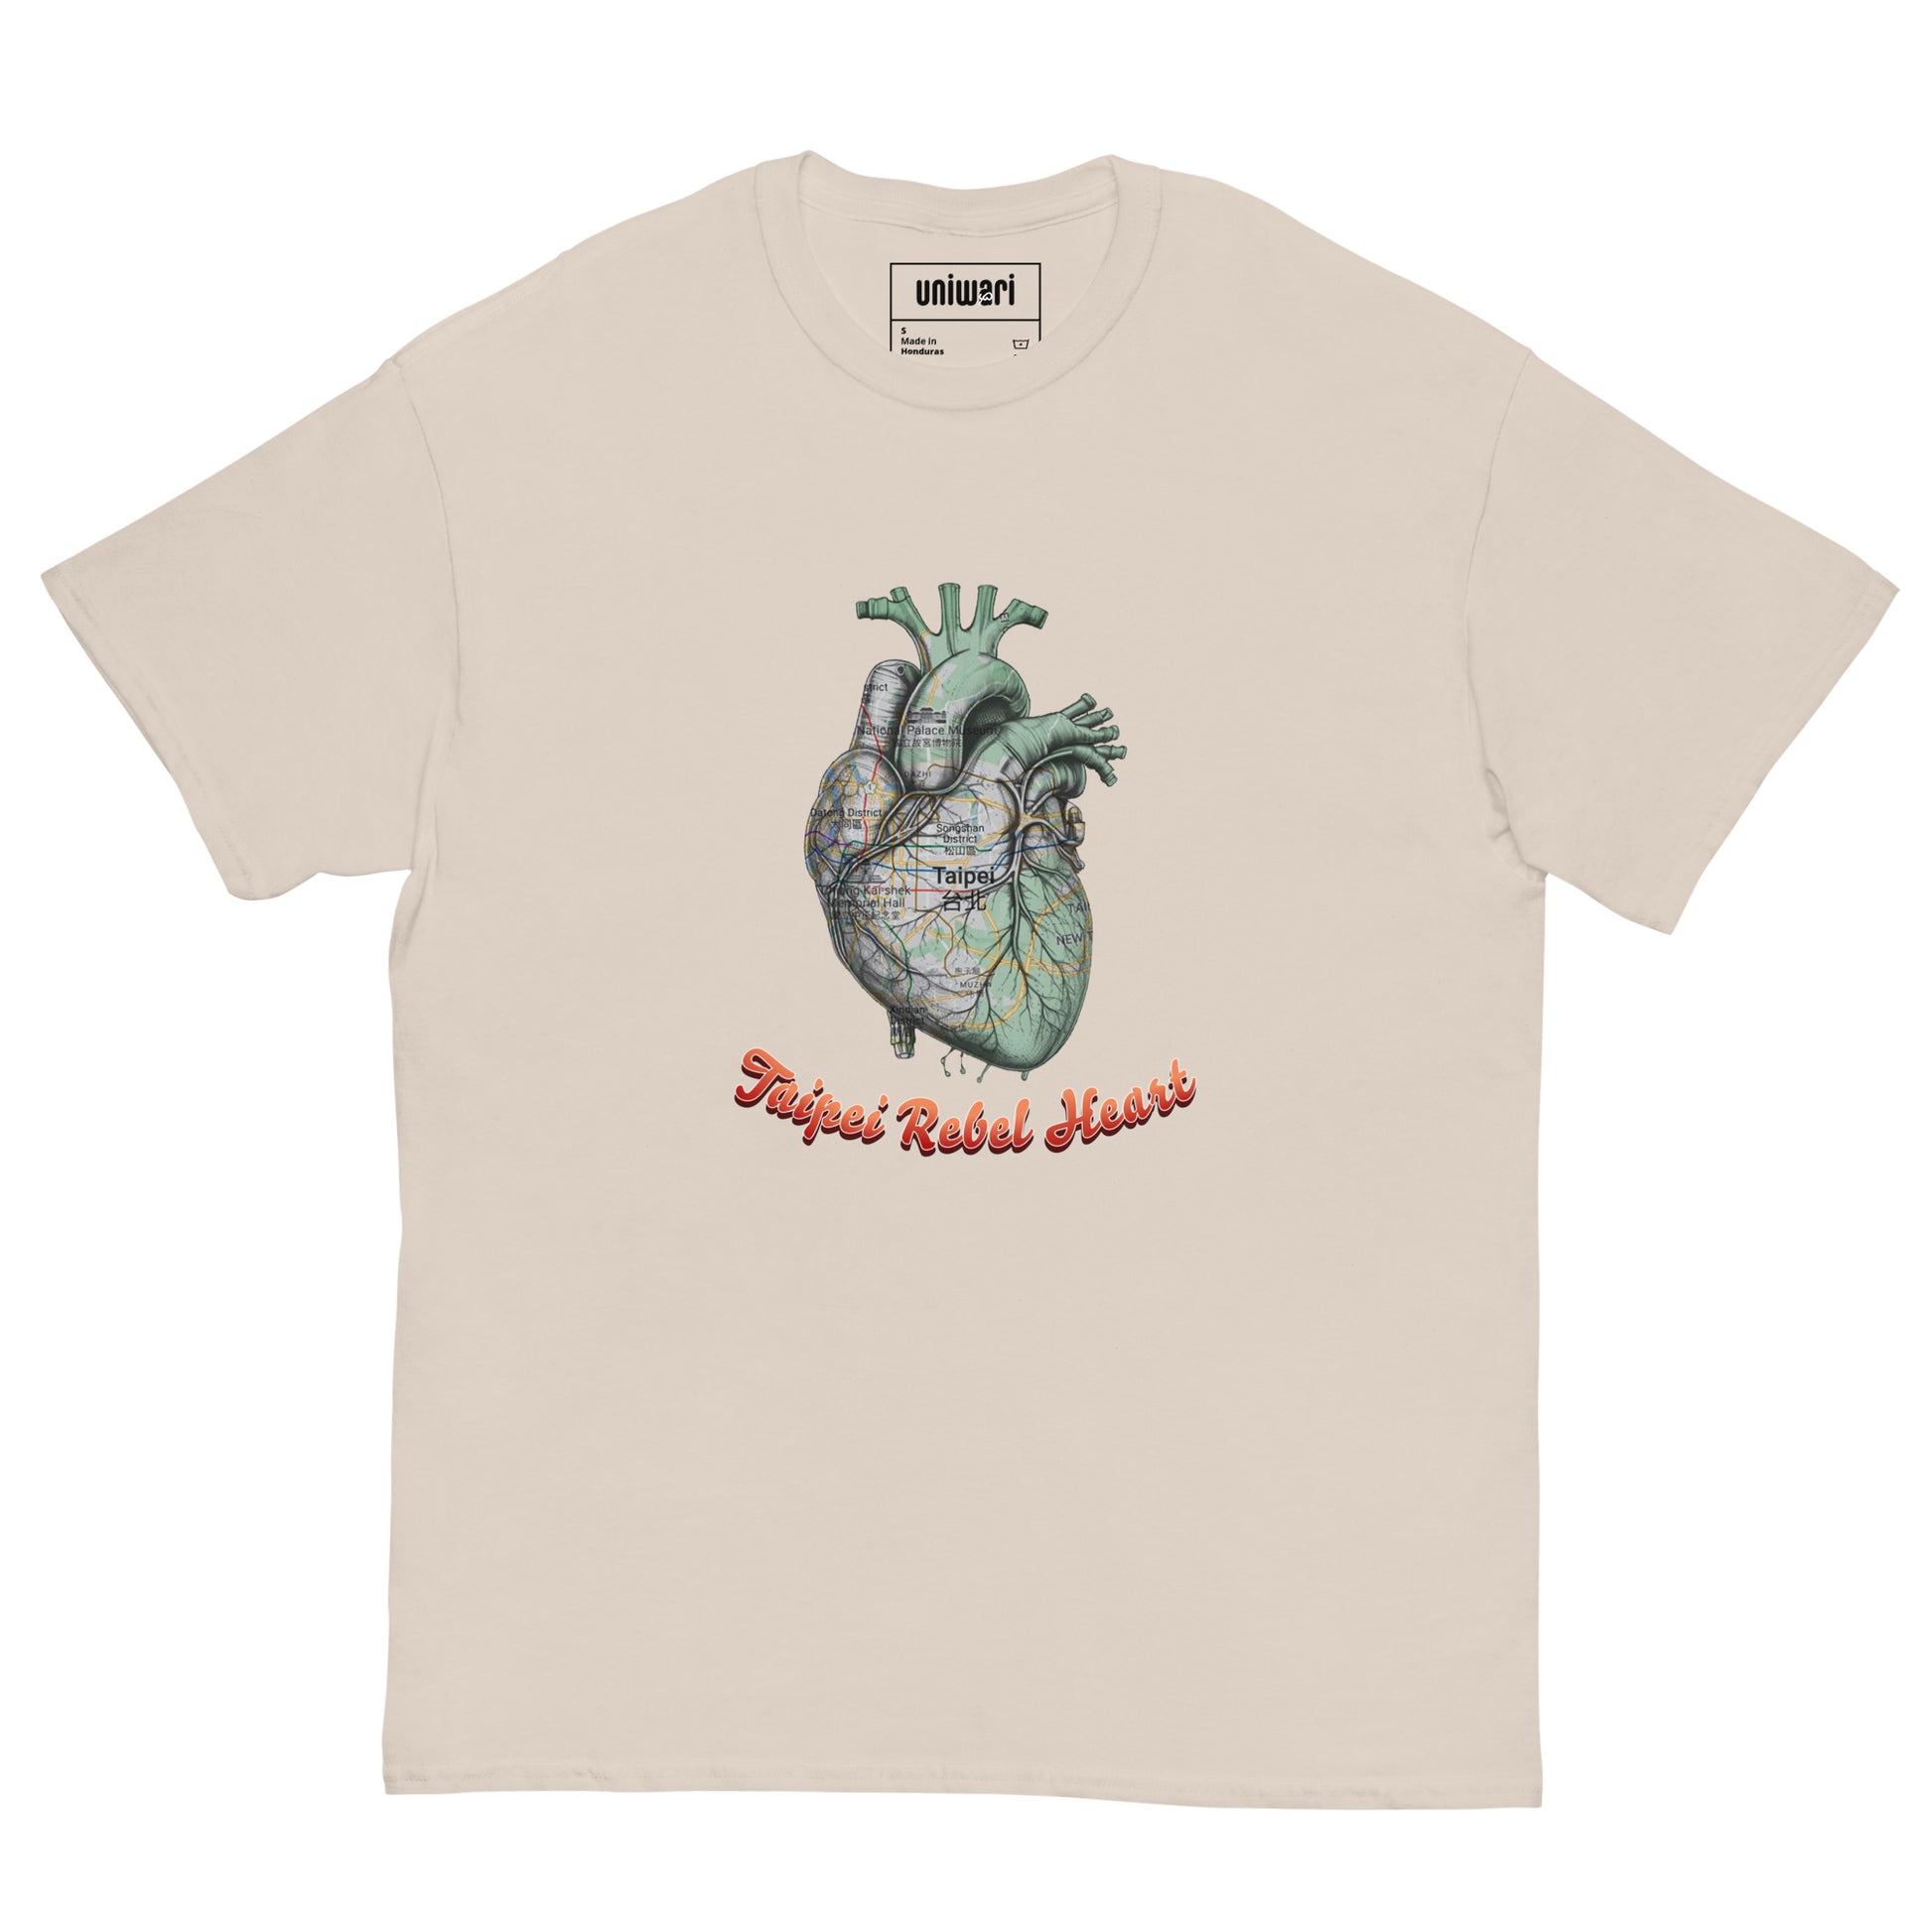 Beige High Quality Tee - Front Design with a Heart Shaped Map of Taipei and a Phrase "Taipei Rebel Heart" print